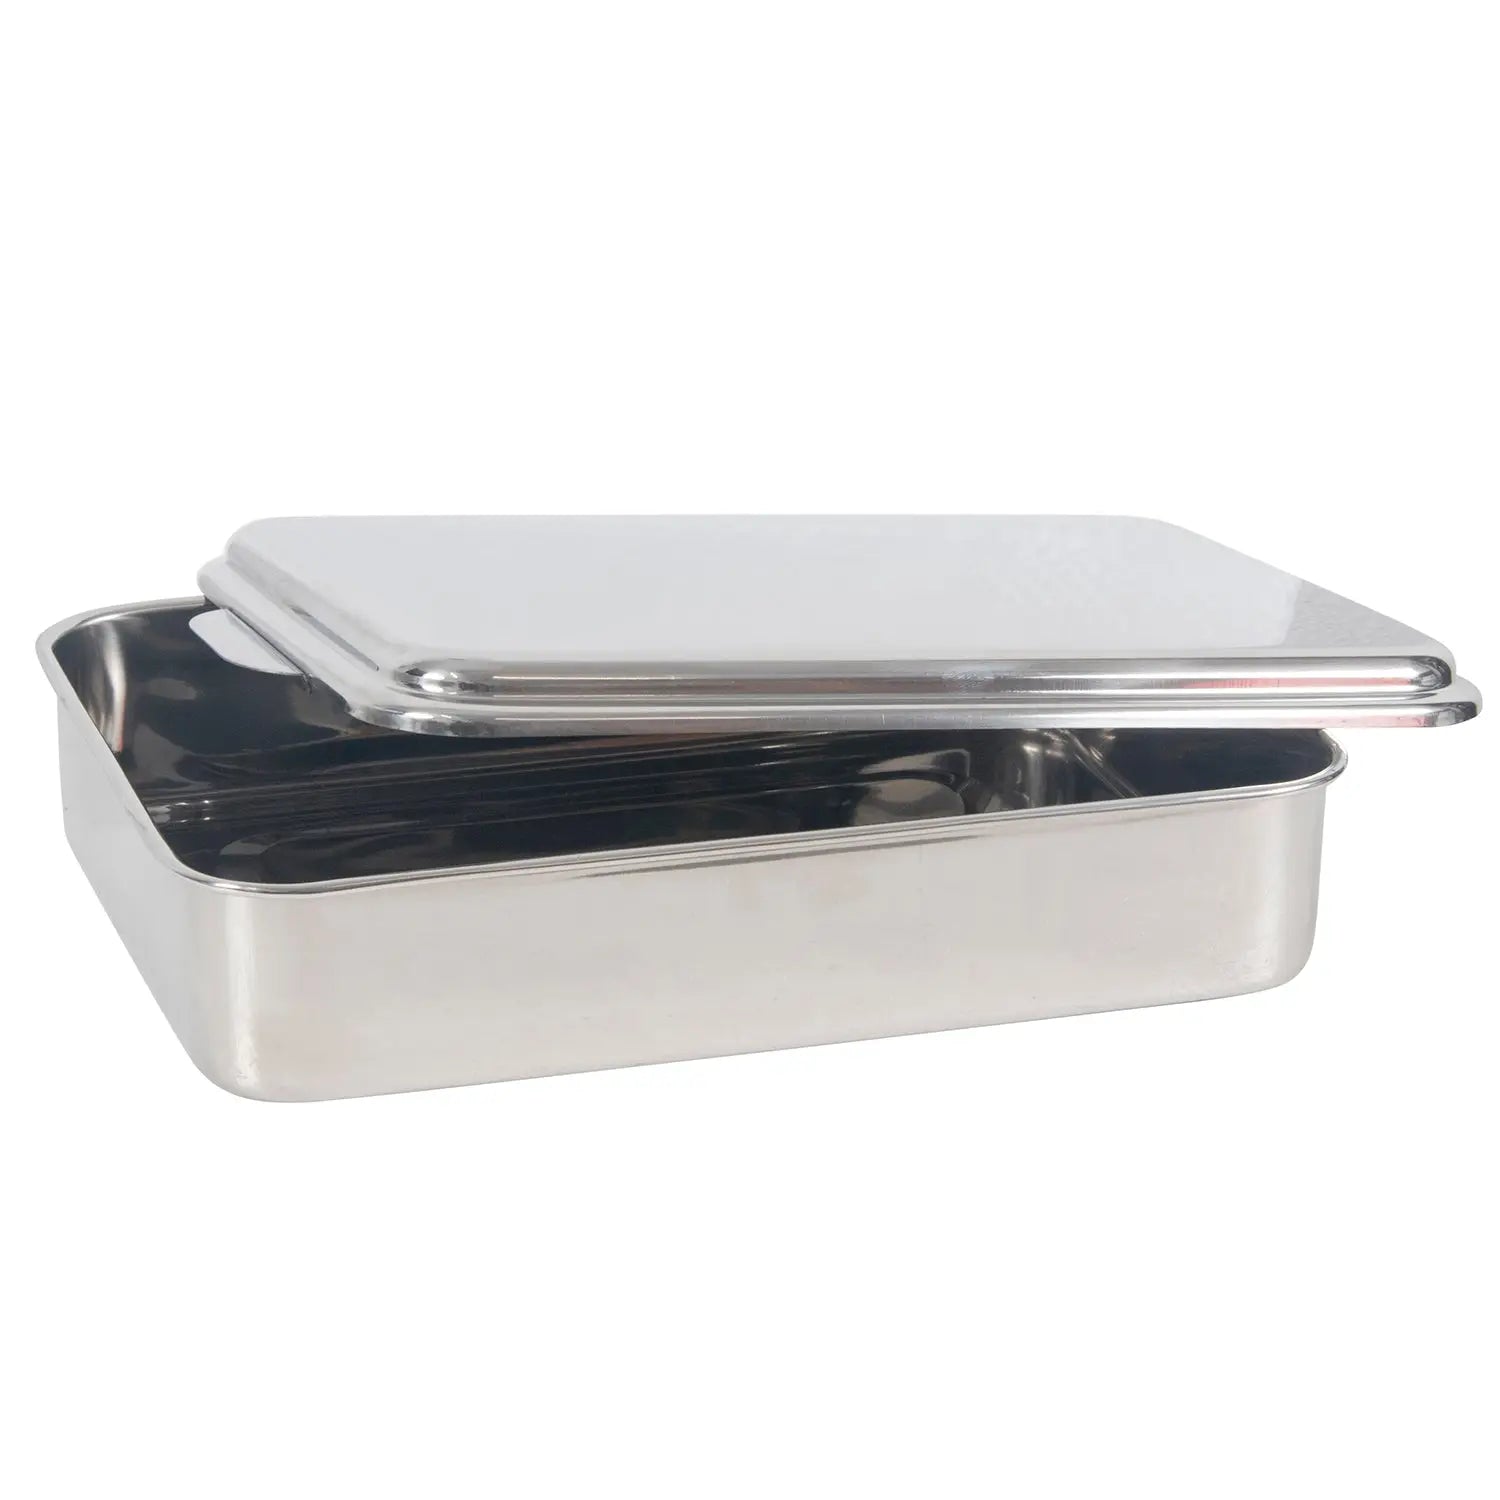 LibertyWare 9 X 13 Stainless Steel Cake Pan with Cover 